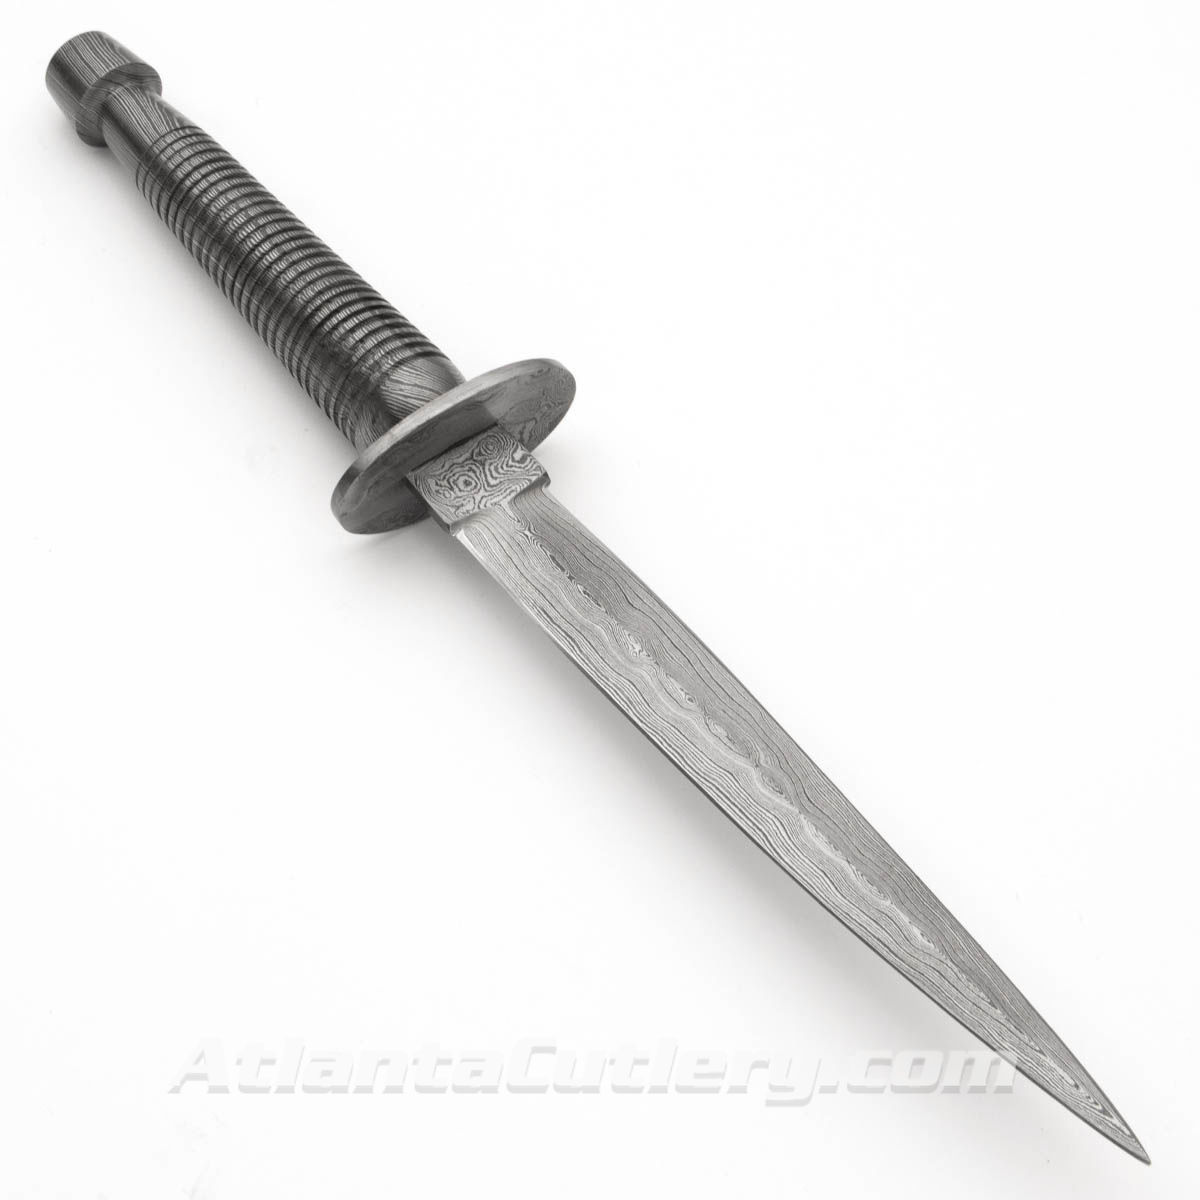 Commando Dagger made of Damascus steel from grip to tip